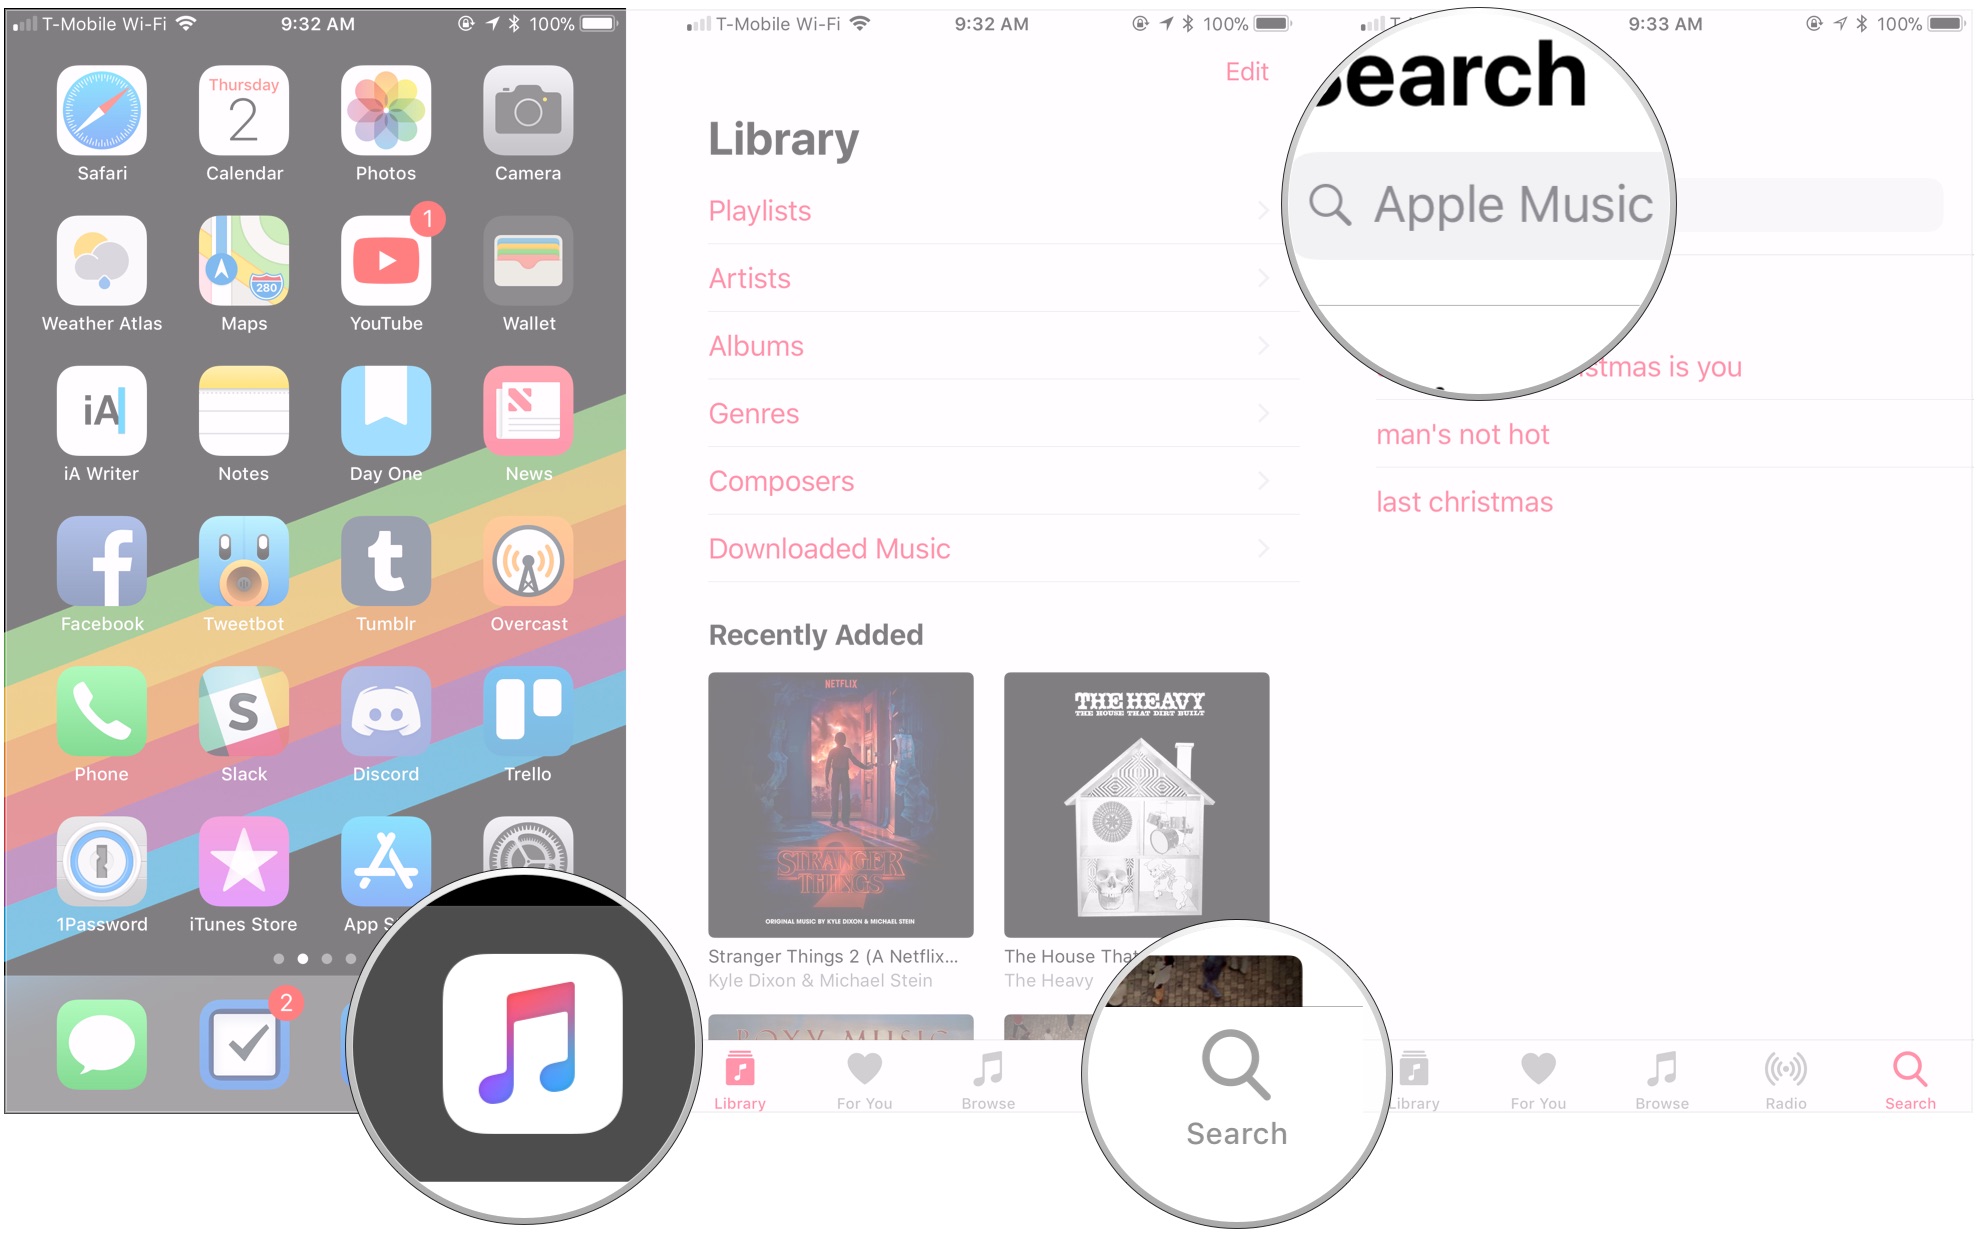 Open Apple Music, tap Search, search for friend